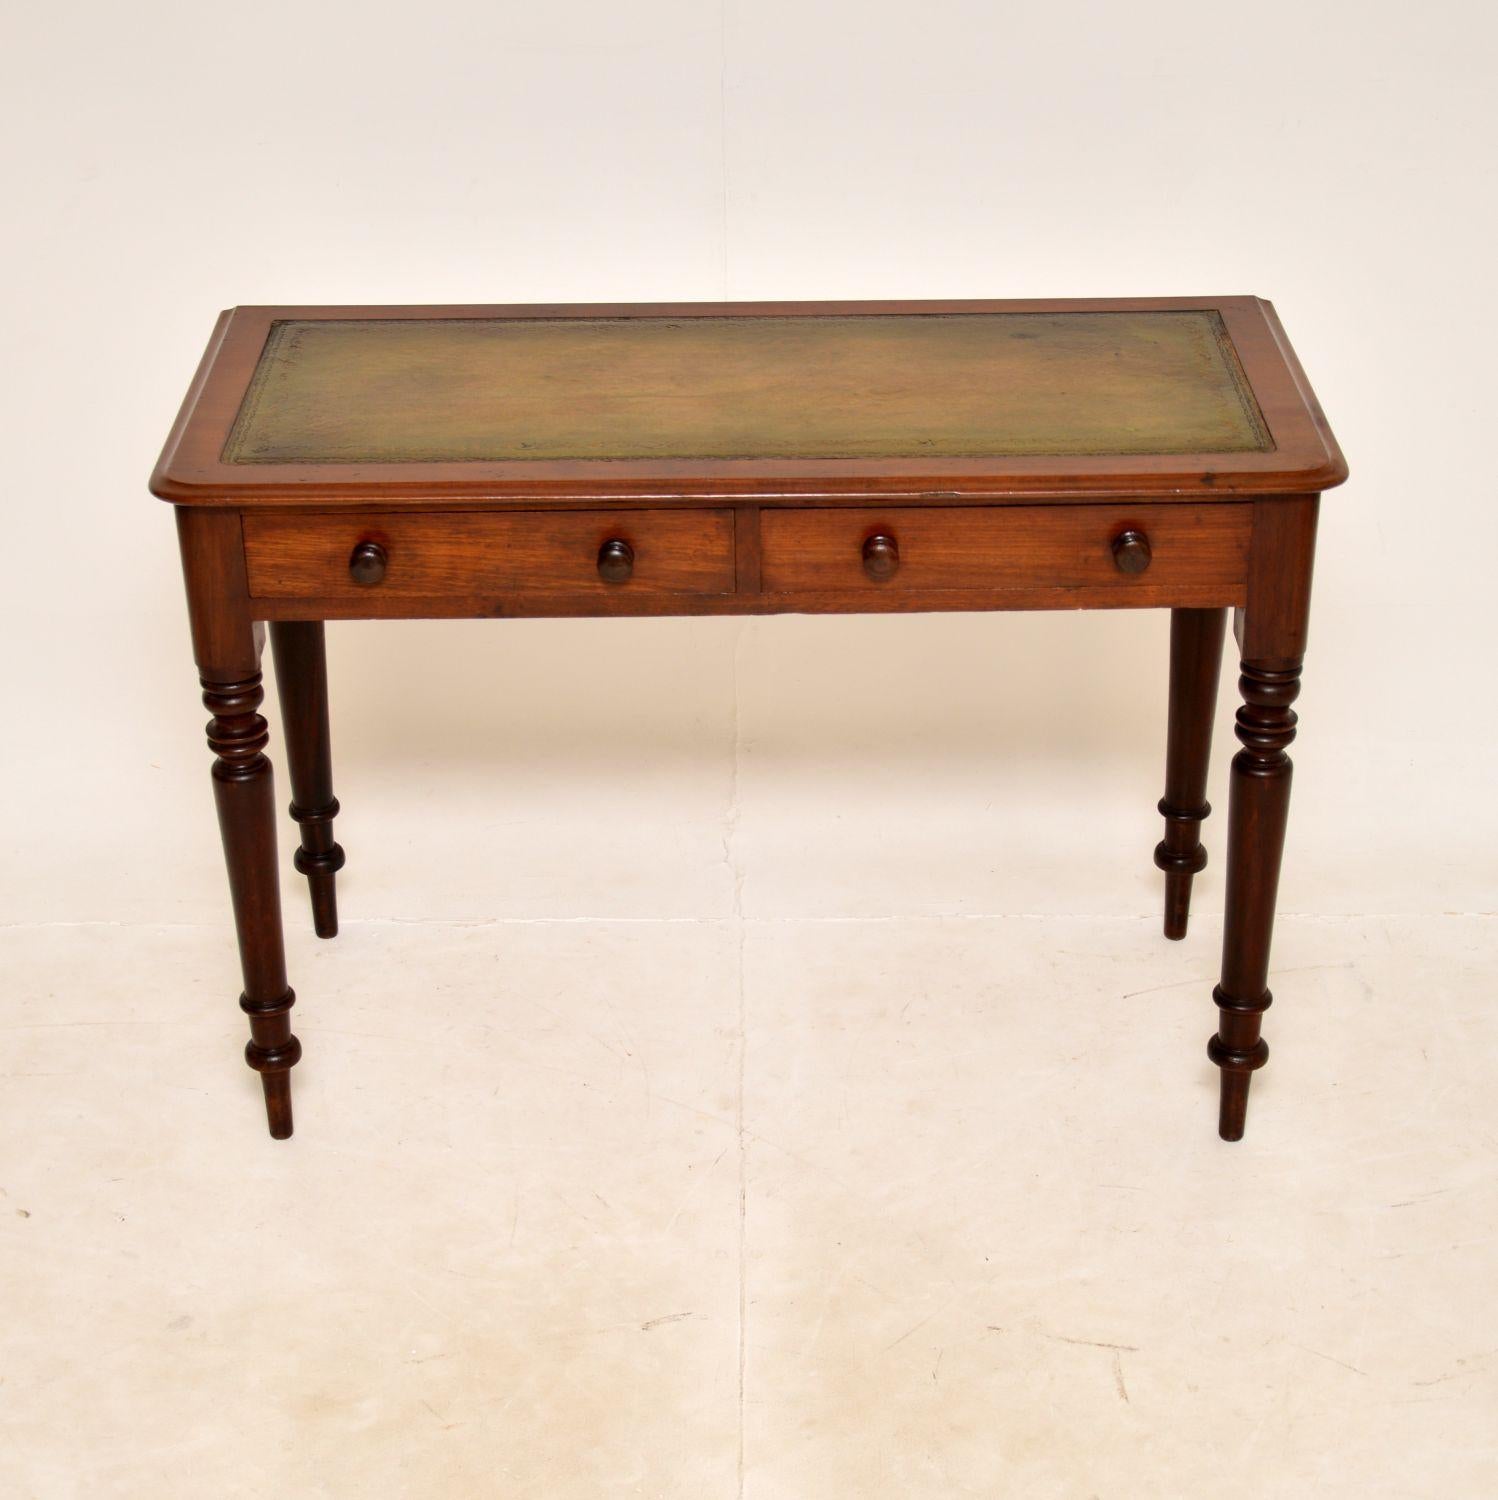 A smart and very useful antique Victorian writing desk. This was made in England, it dates from around the 1860-1880 period.

It is very well made and is a very useful size, not too deep from front to back. The inset leather writing surface is